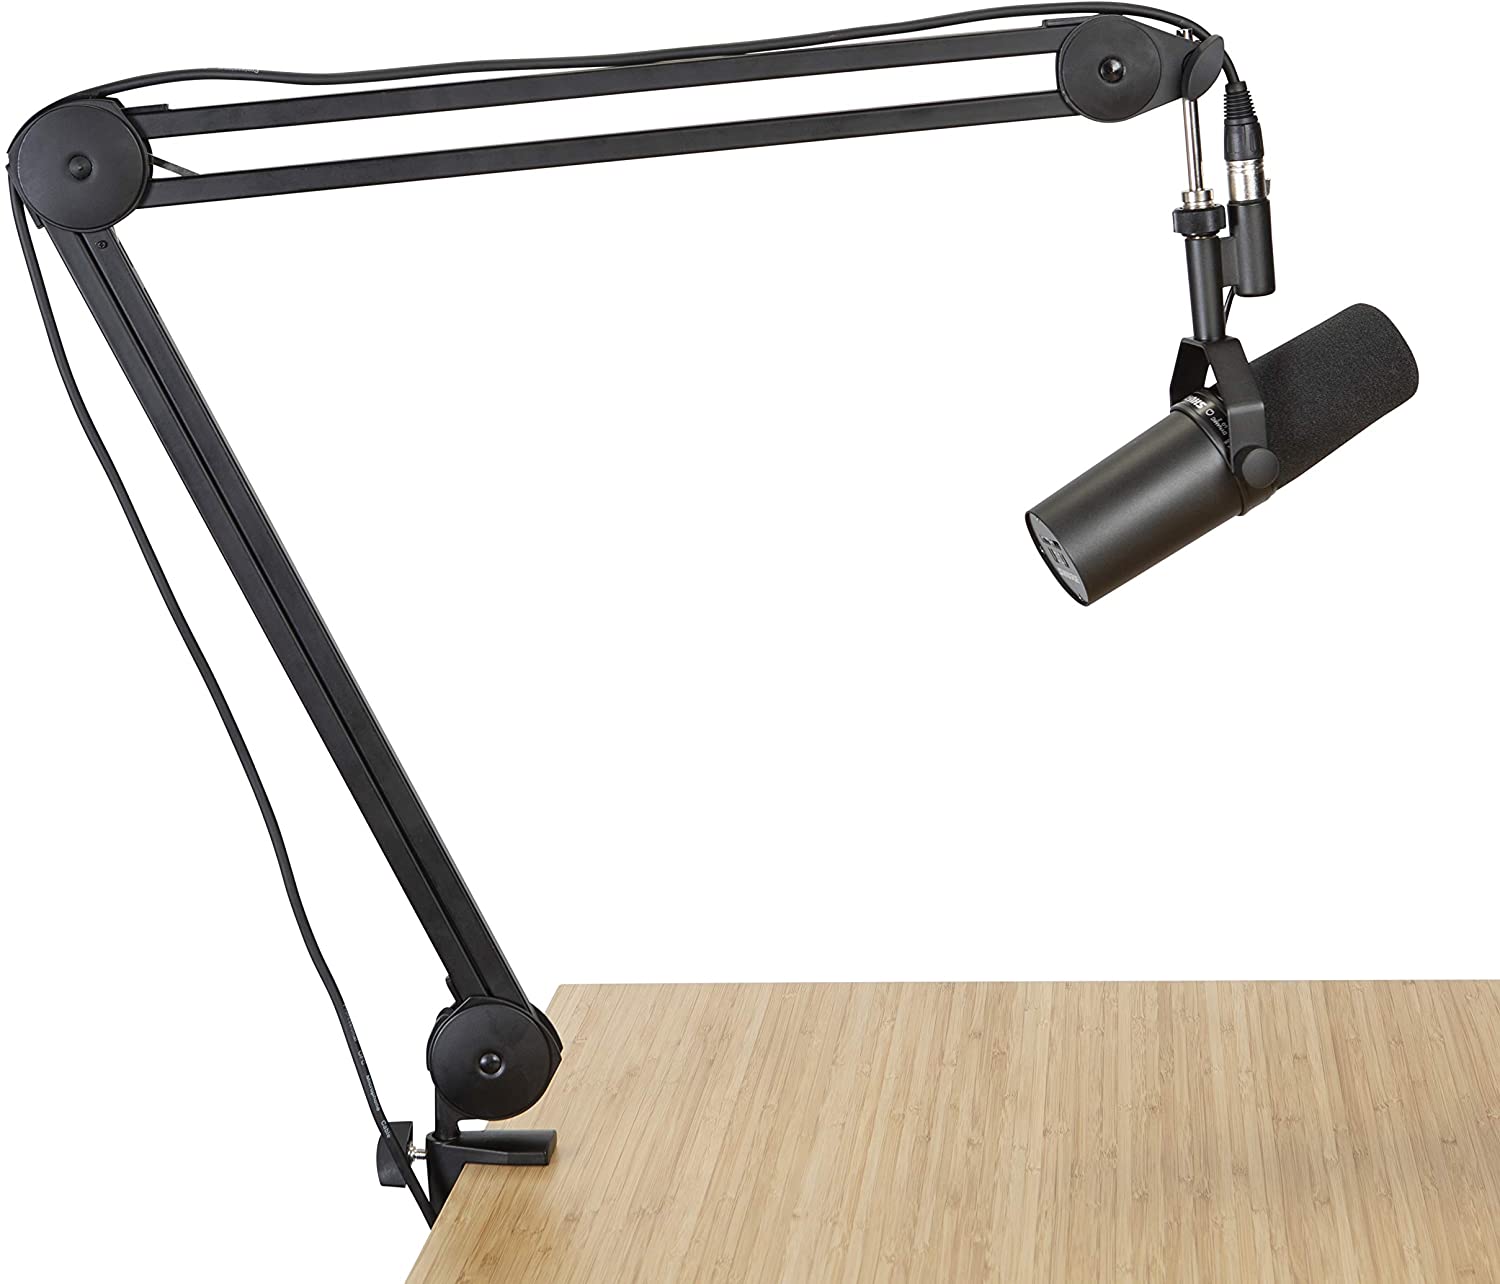 Gator Frameworks Deluxe Desk-Mounted Broadcast Microphone Boom Stand for Podcasts & Recording  - GFWMICBCBM2000 - Pro-Distributing